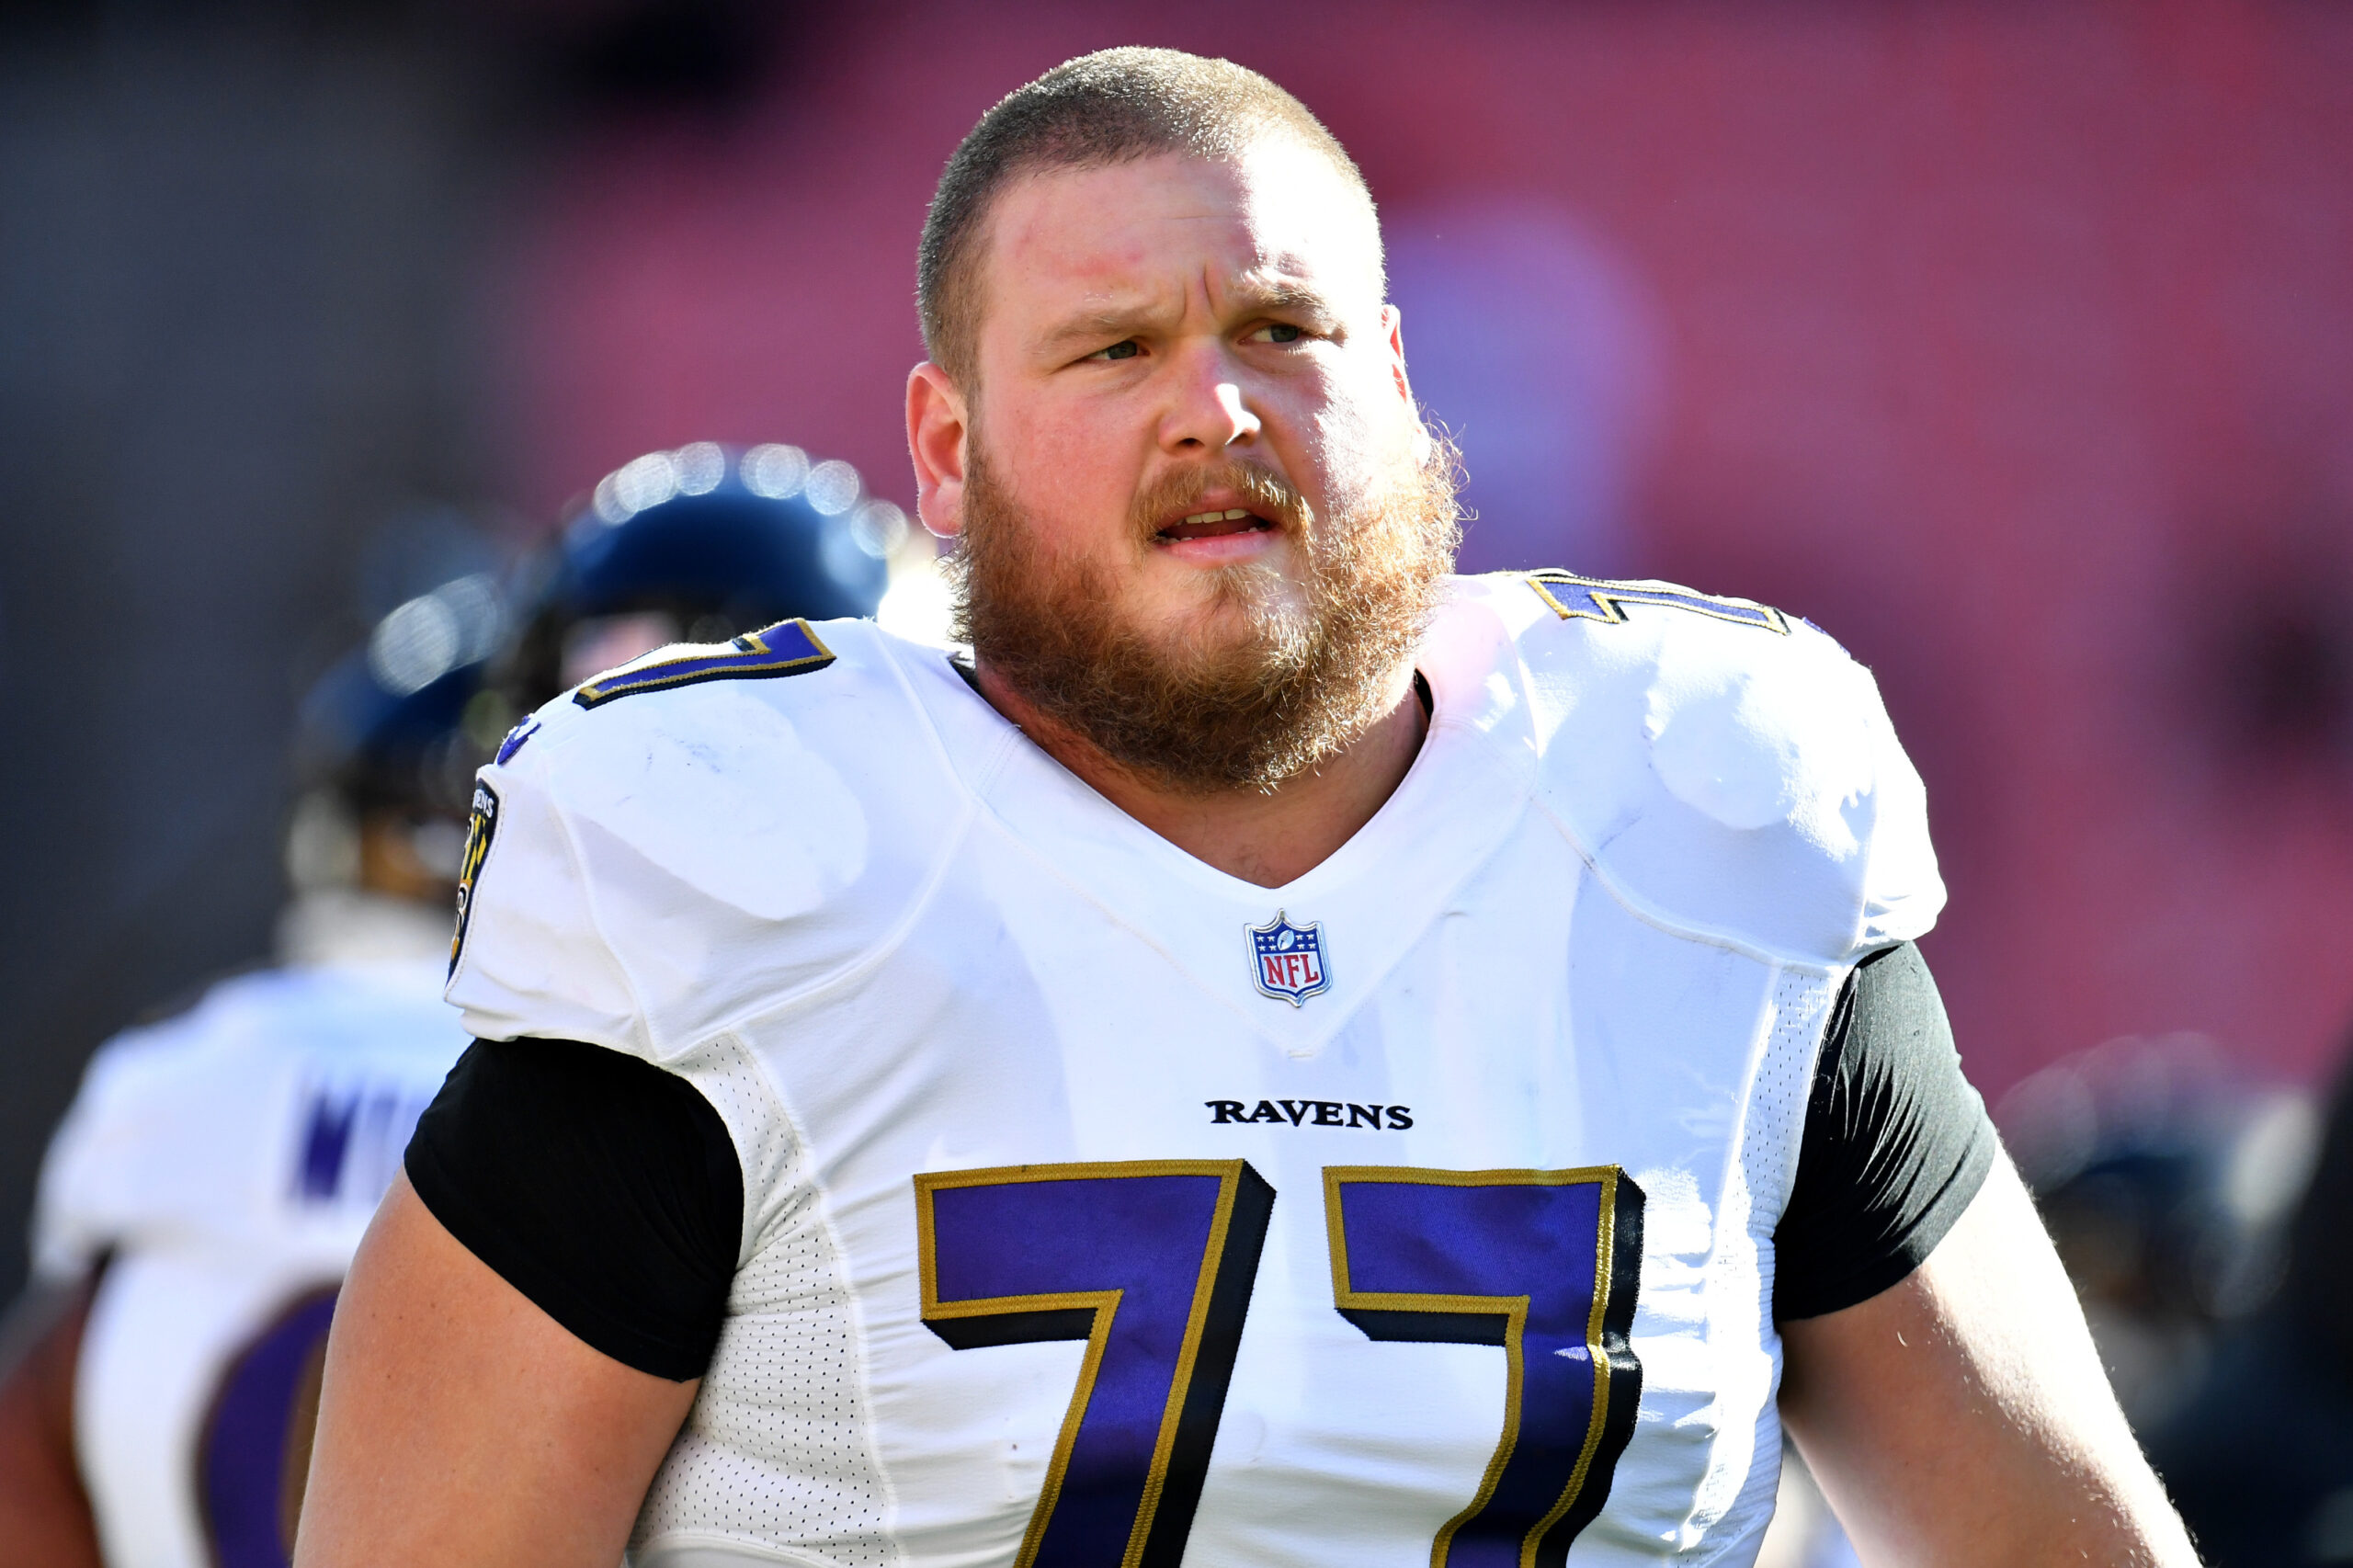 Bradley Bozeman contract, salary and net worth explored - Celebrity FAQs